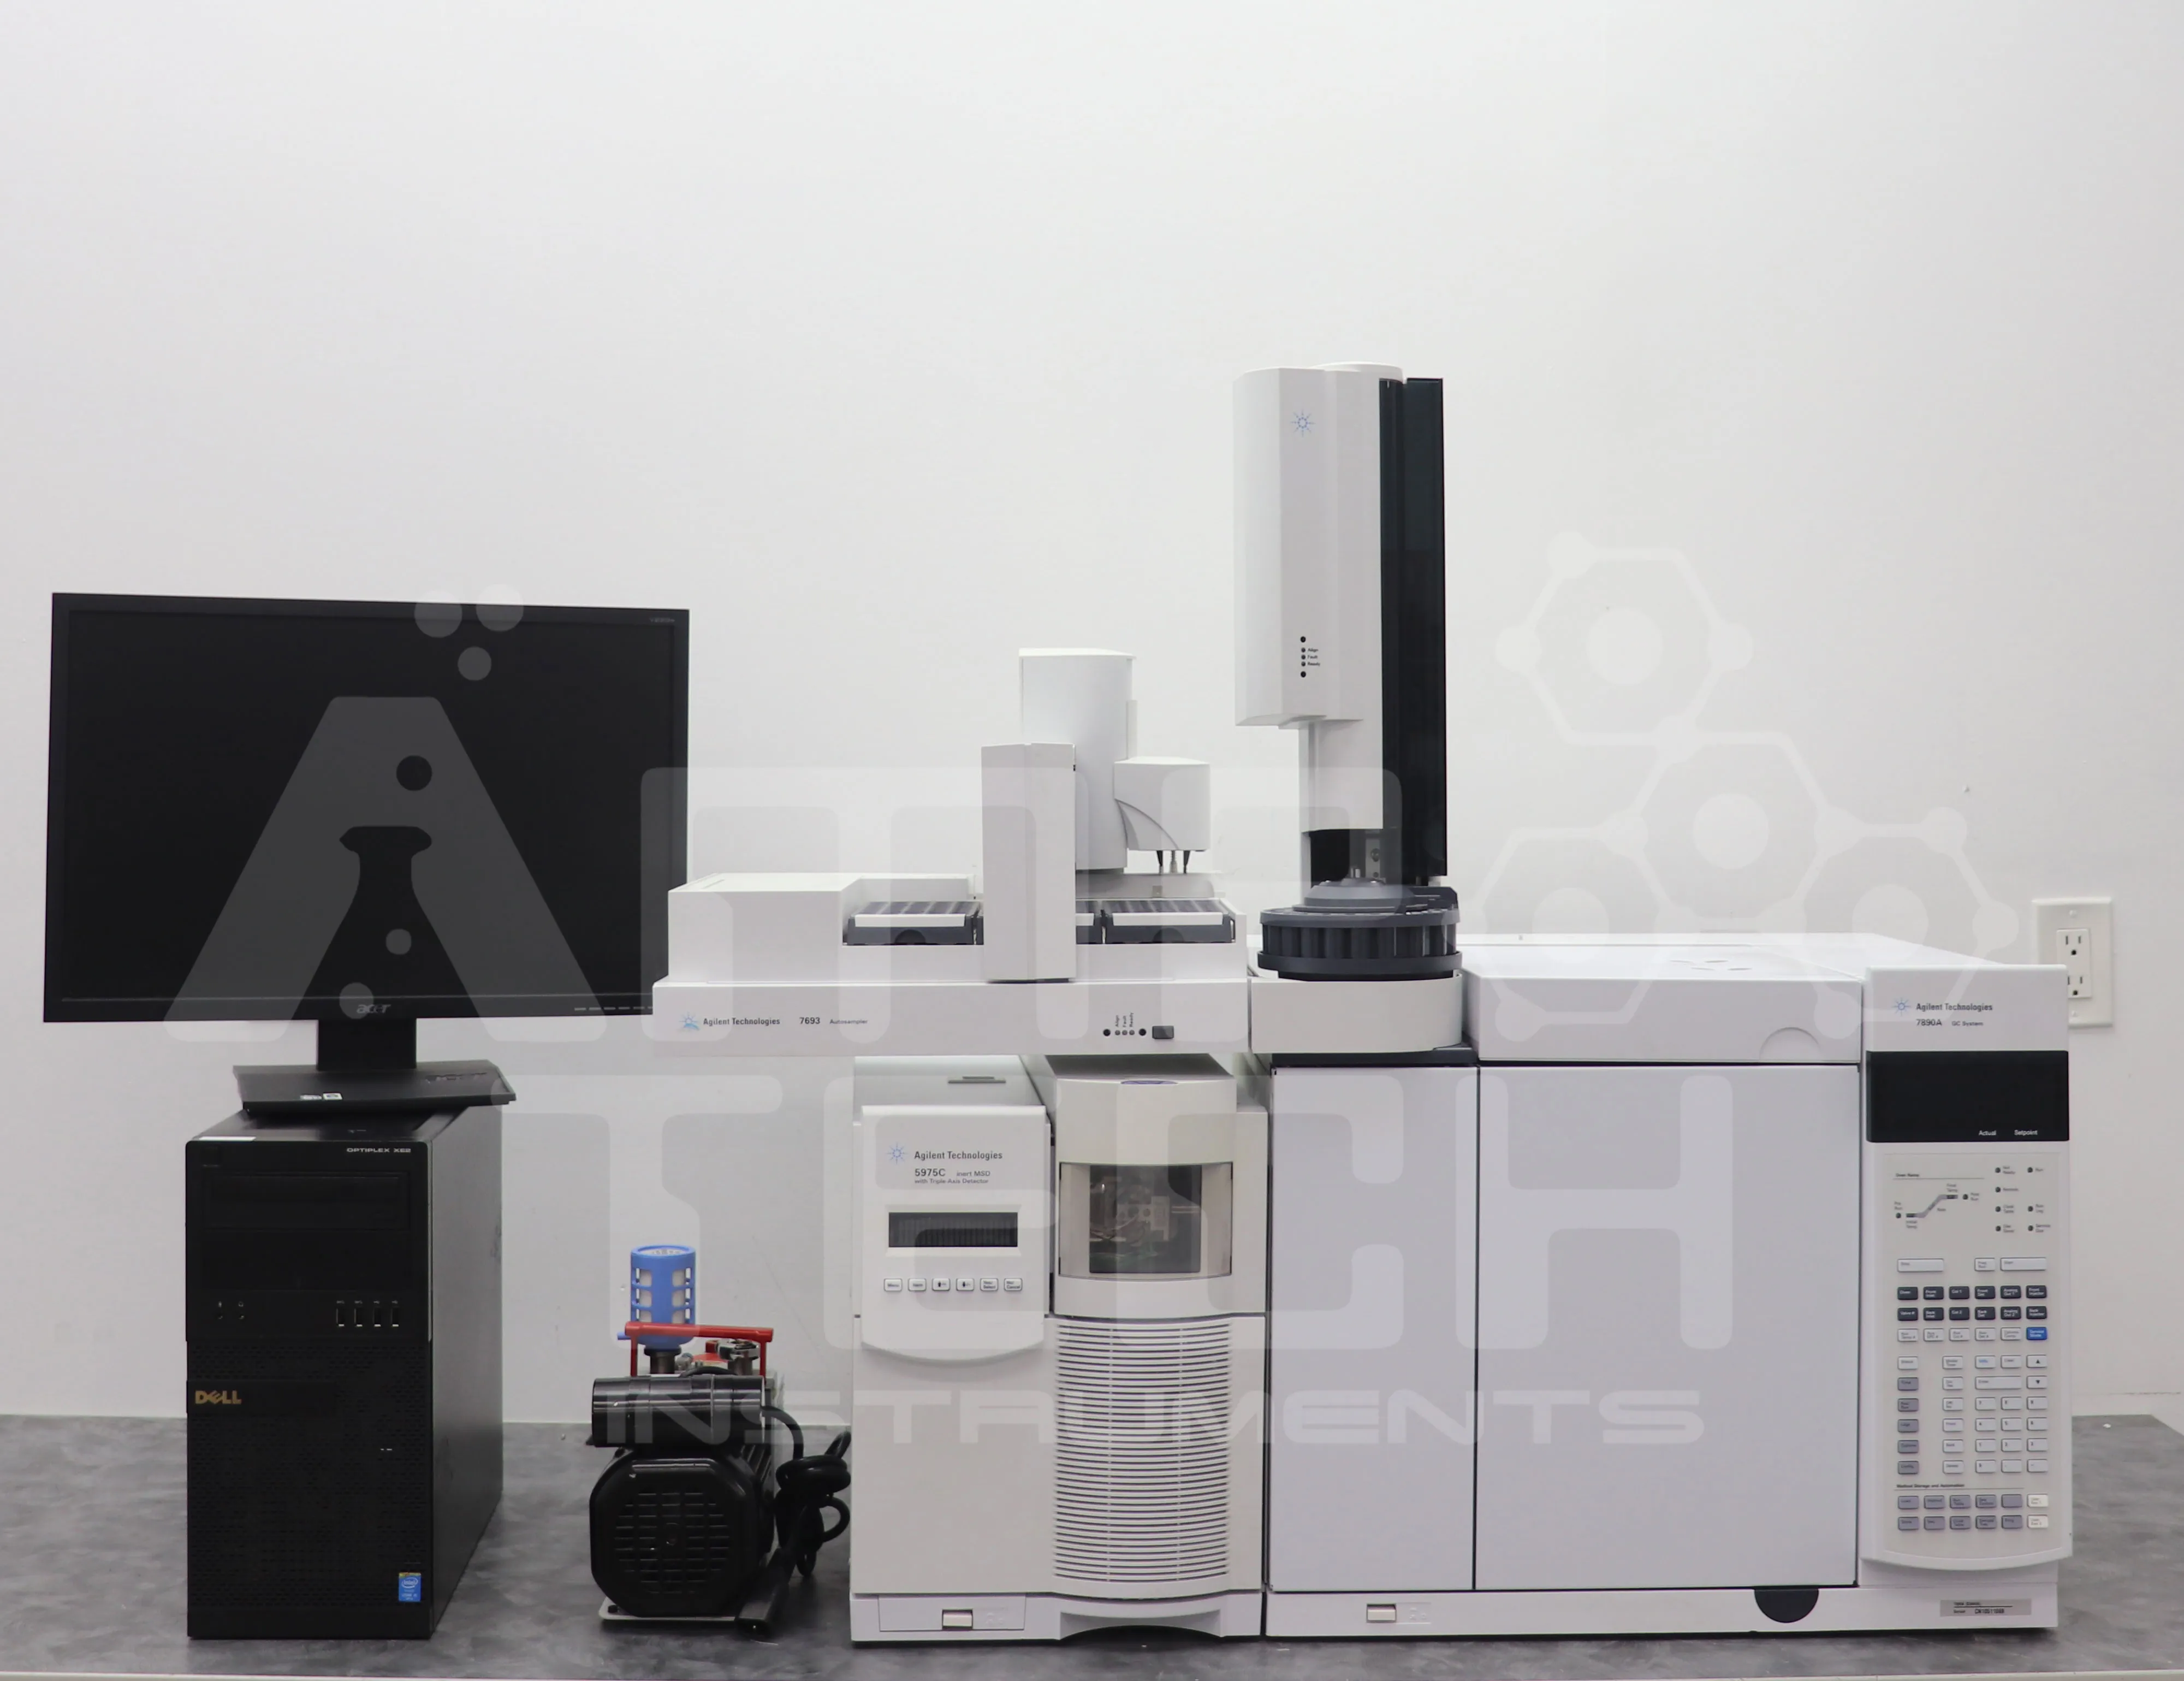 Agilent 5975C Inert EI Triple Axis MS with 7890 GC and 7693 AS